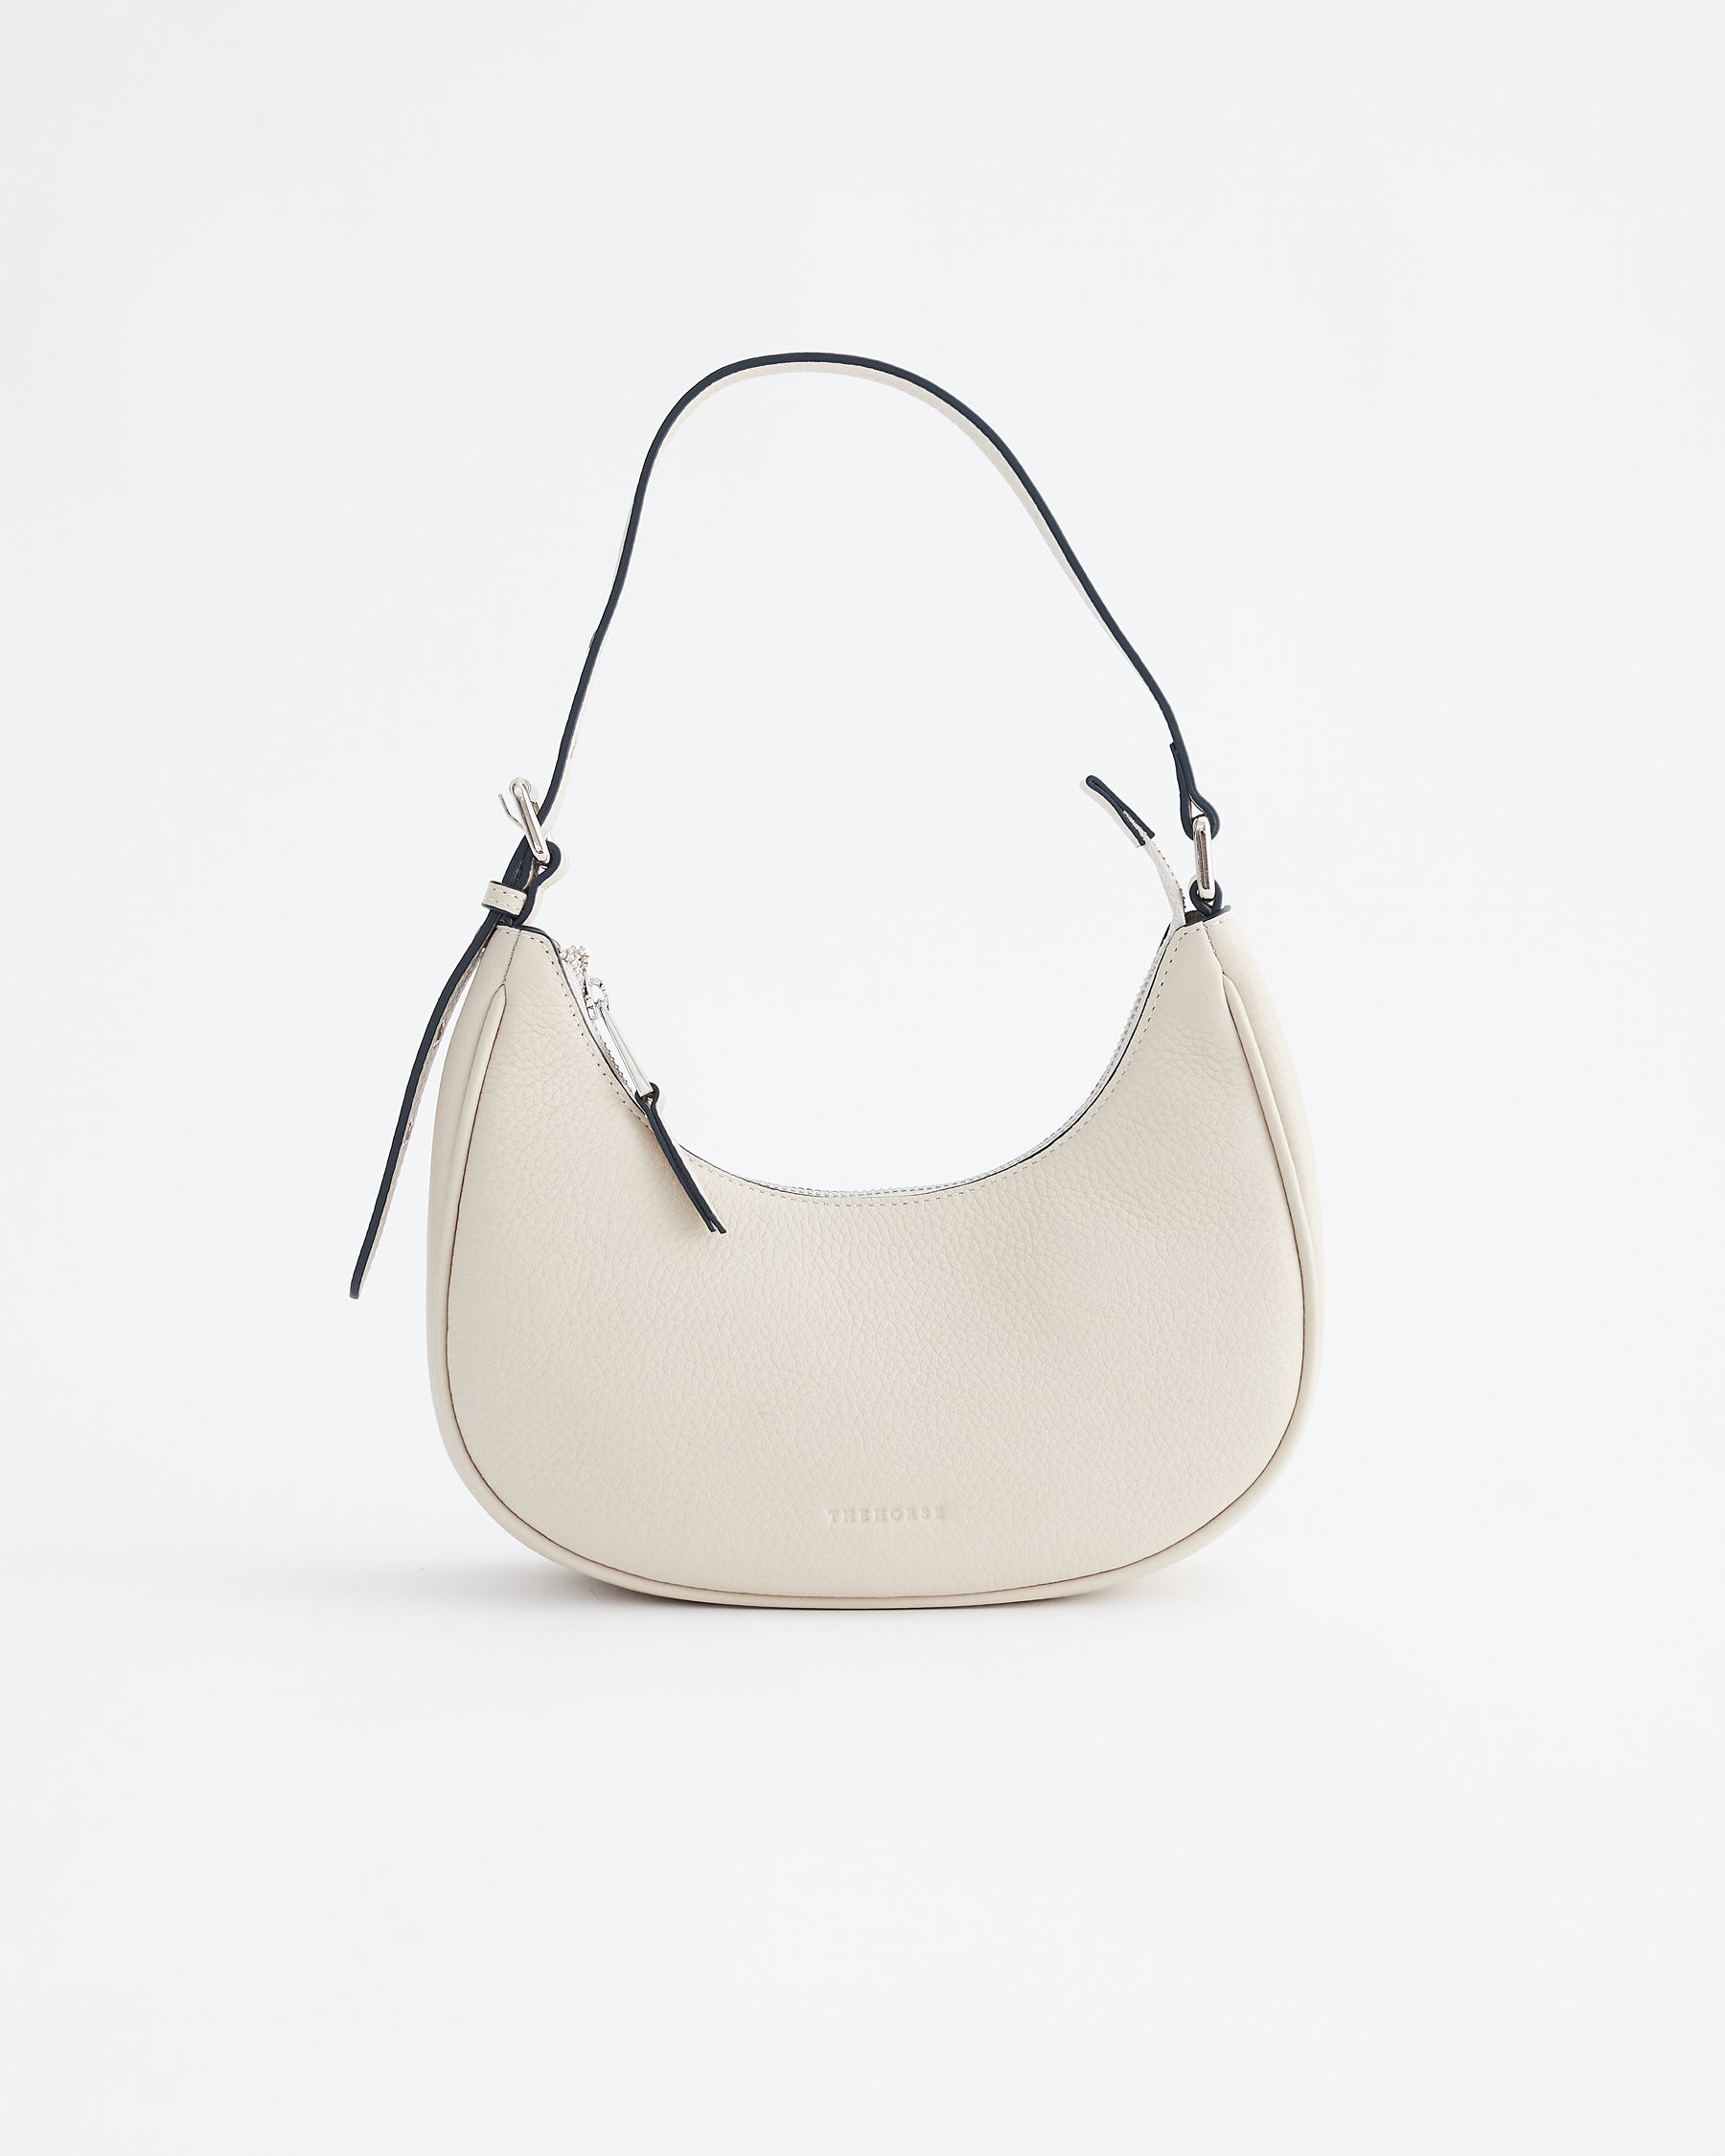 Friday Bag: Leather Crescent Bag in Oat by The Horse®